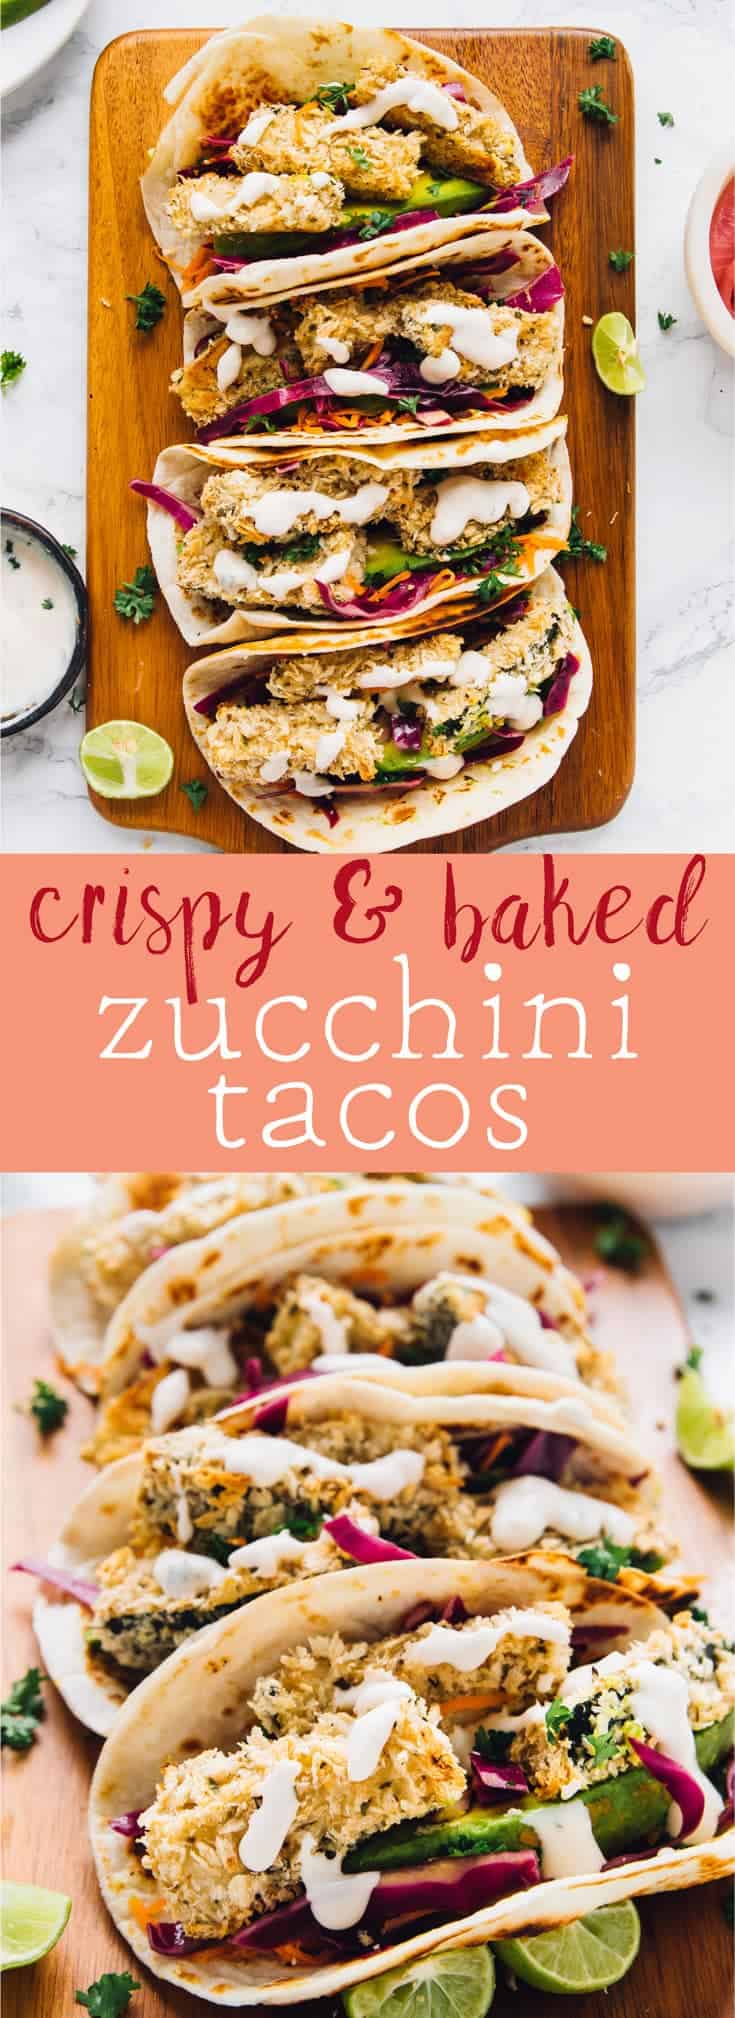 These Crispy Zucchini Tacos will impress you and your family or guests like crazy! Loaded with layers of flavour, so easy to make and topped with a dreamy lime crema! via https://jessicainthekitchen.com